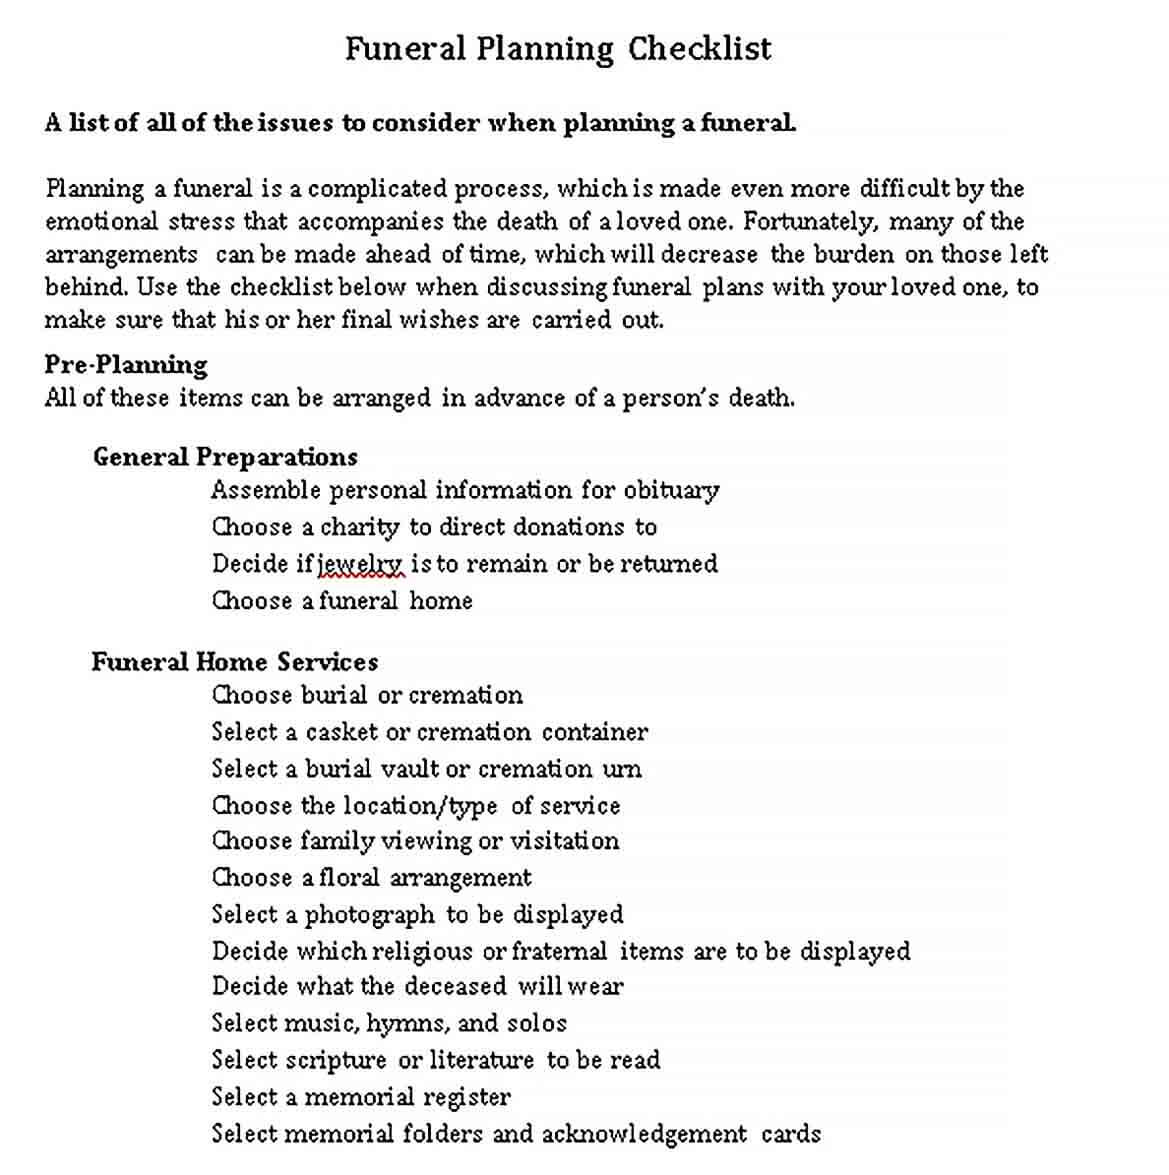 Sample Funeral Planning Checklist in PDF